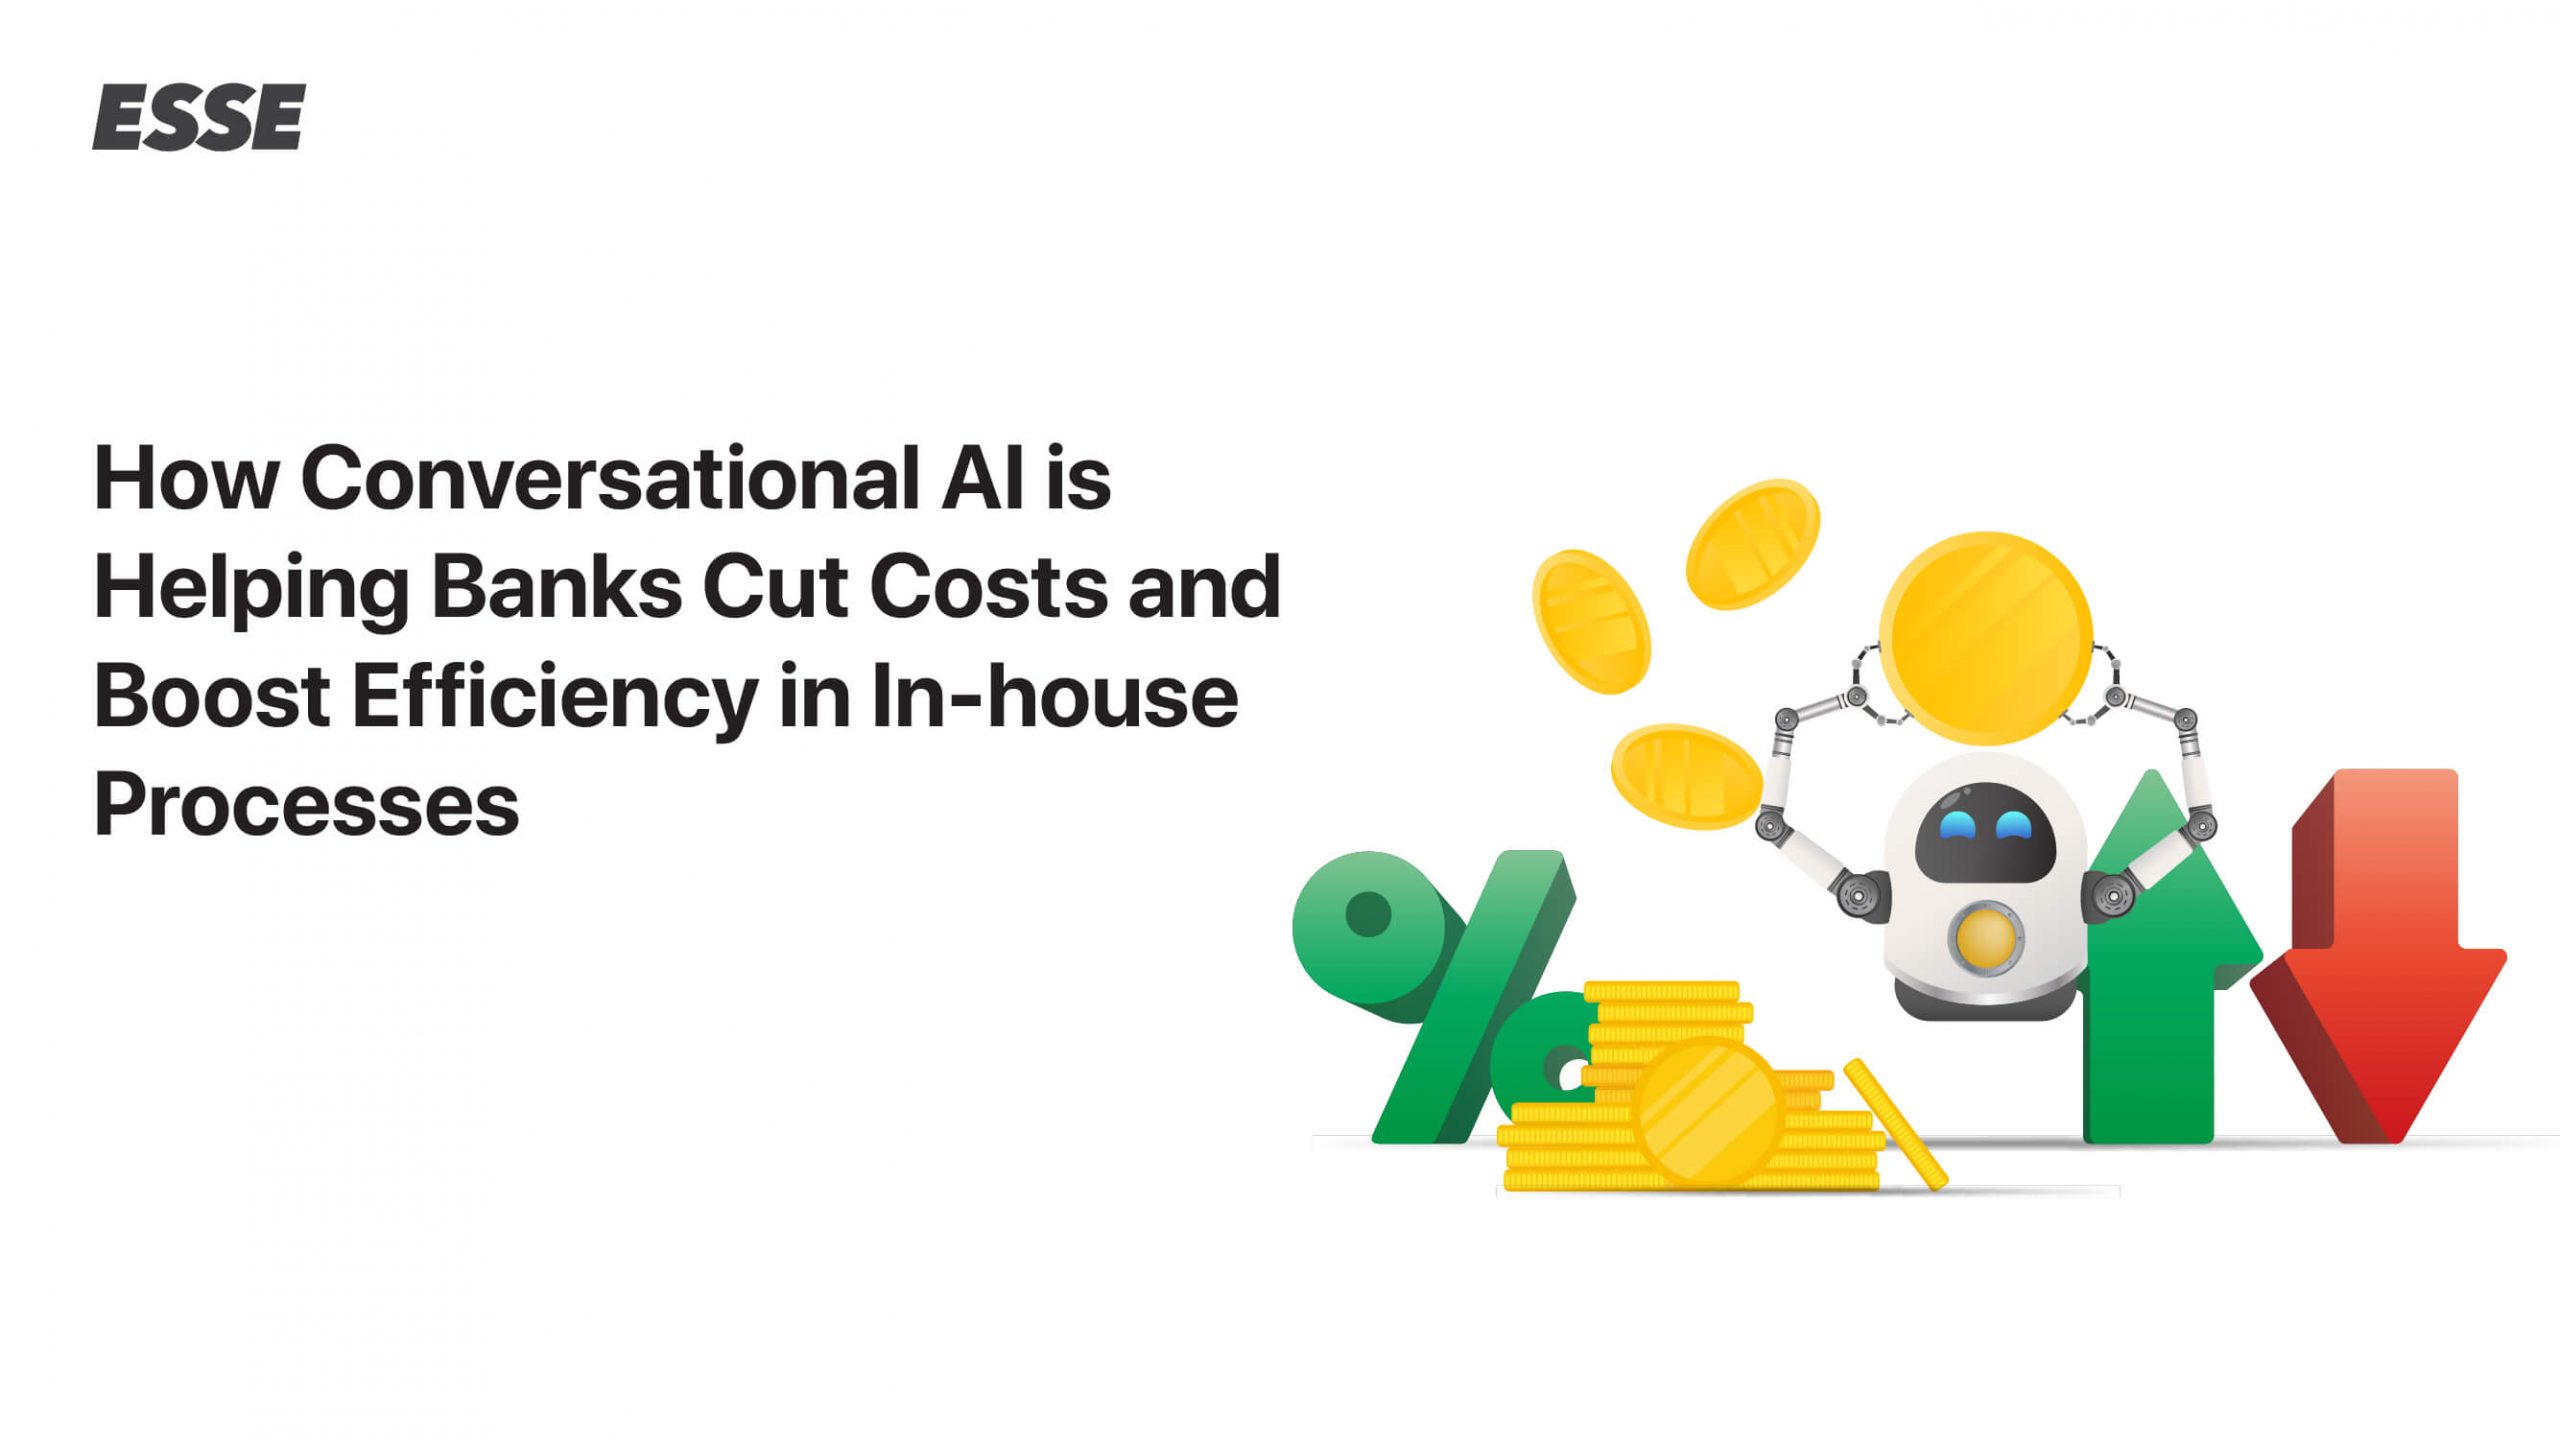 How Conversational AI is Helping Banks Cut Costs and Boost Efficiency in In-house Processes